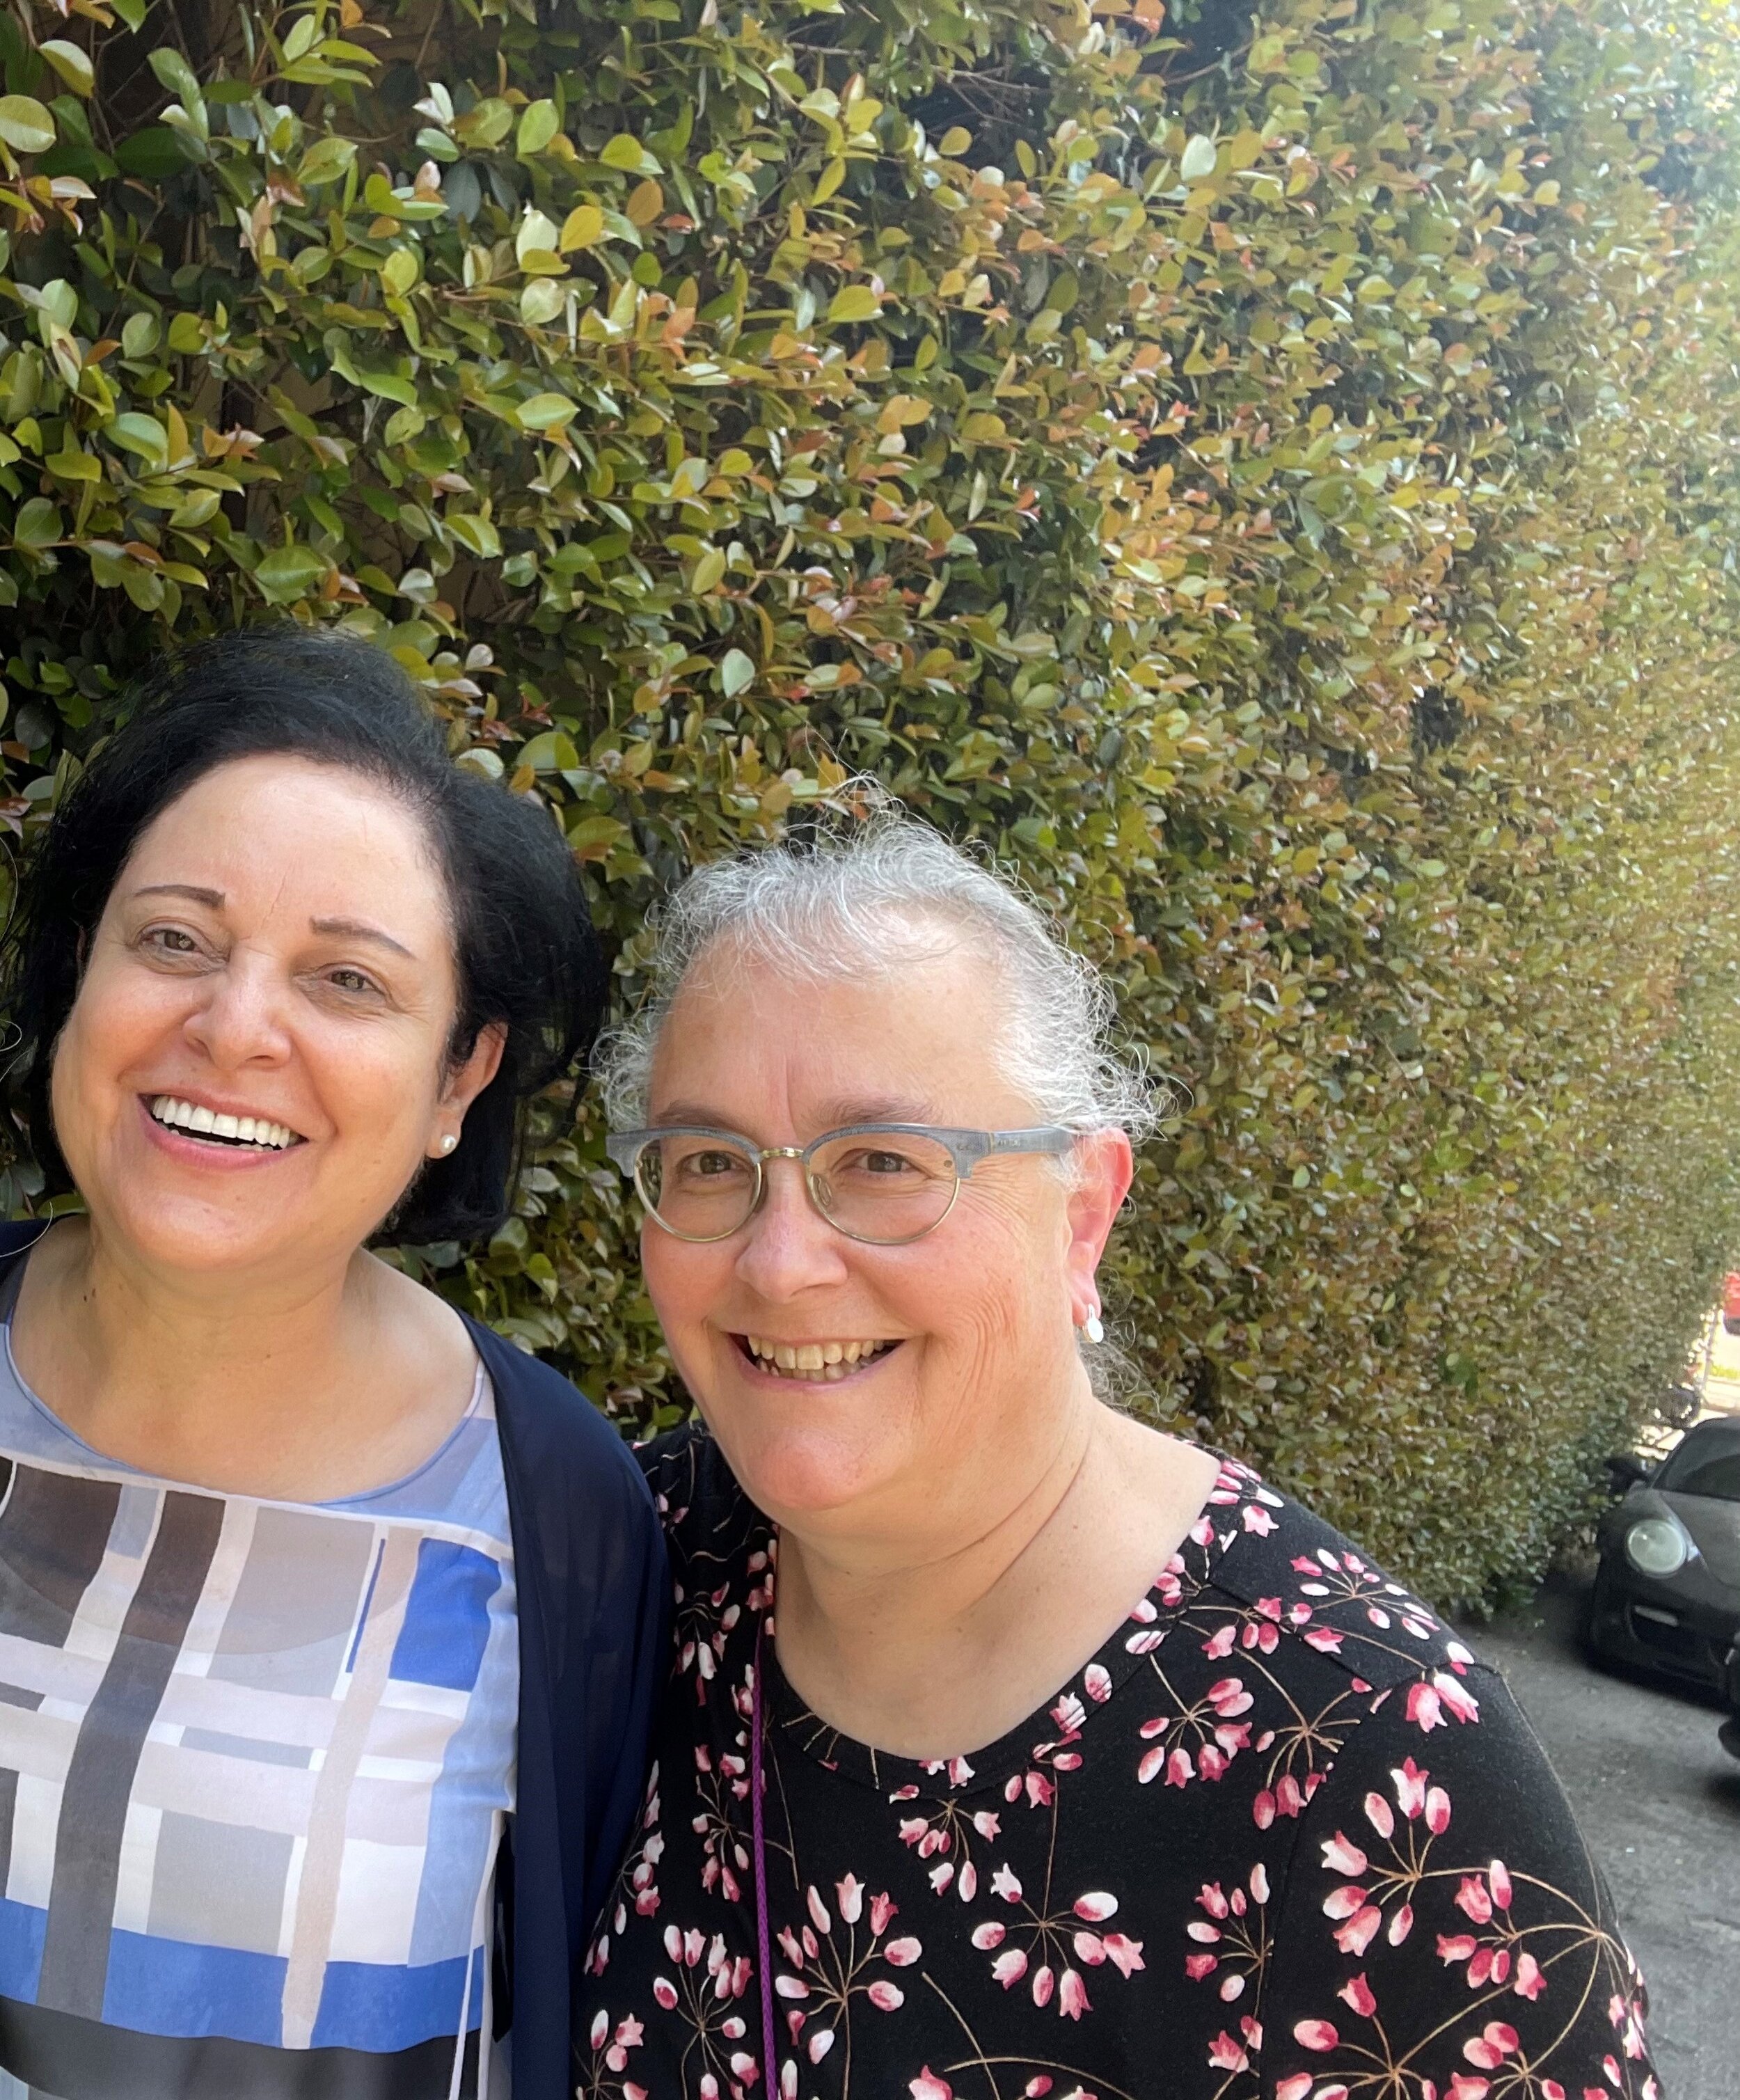  Rev. Najla Kassab with Julie, headed into the lovely lunch which followed our conversations 